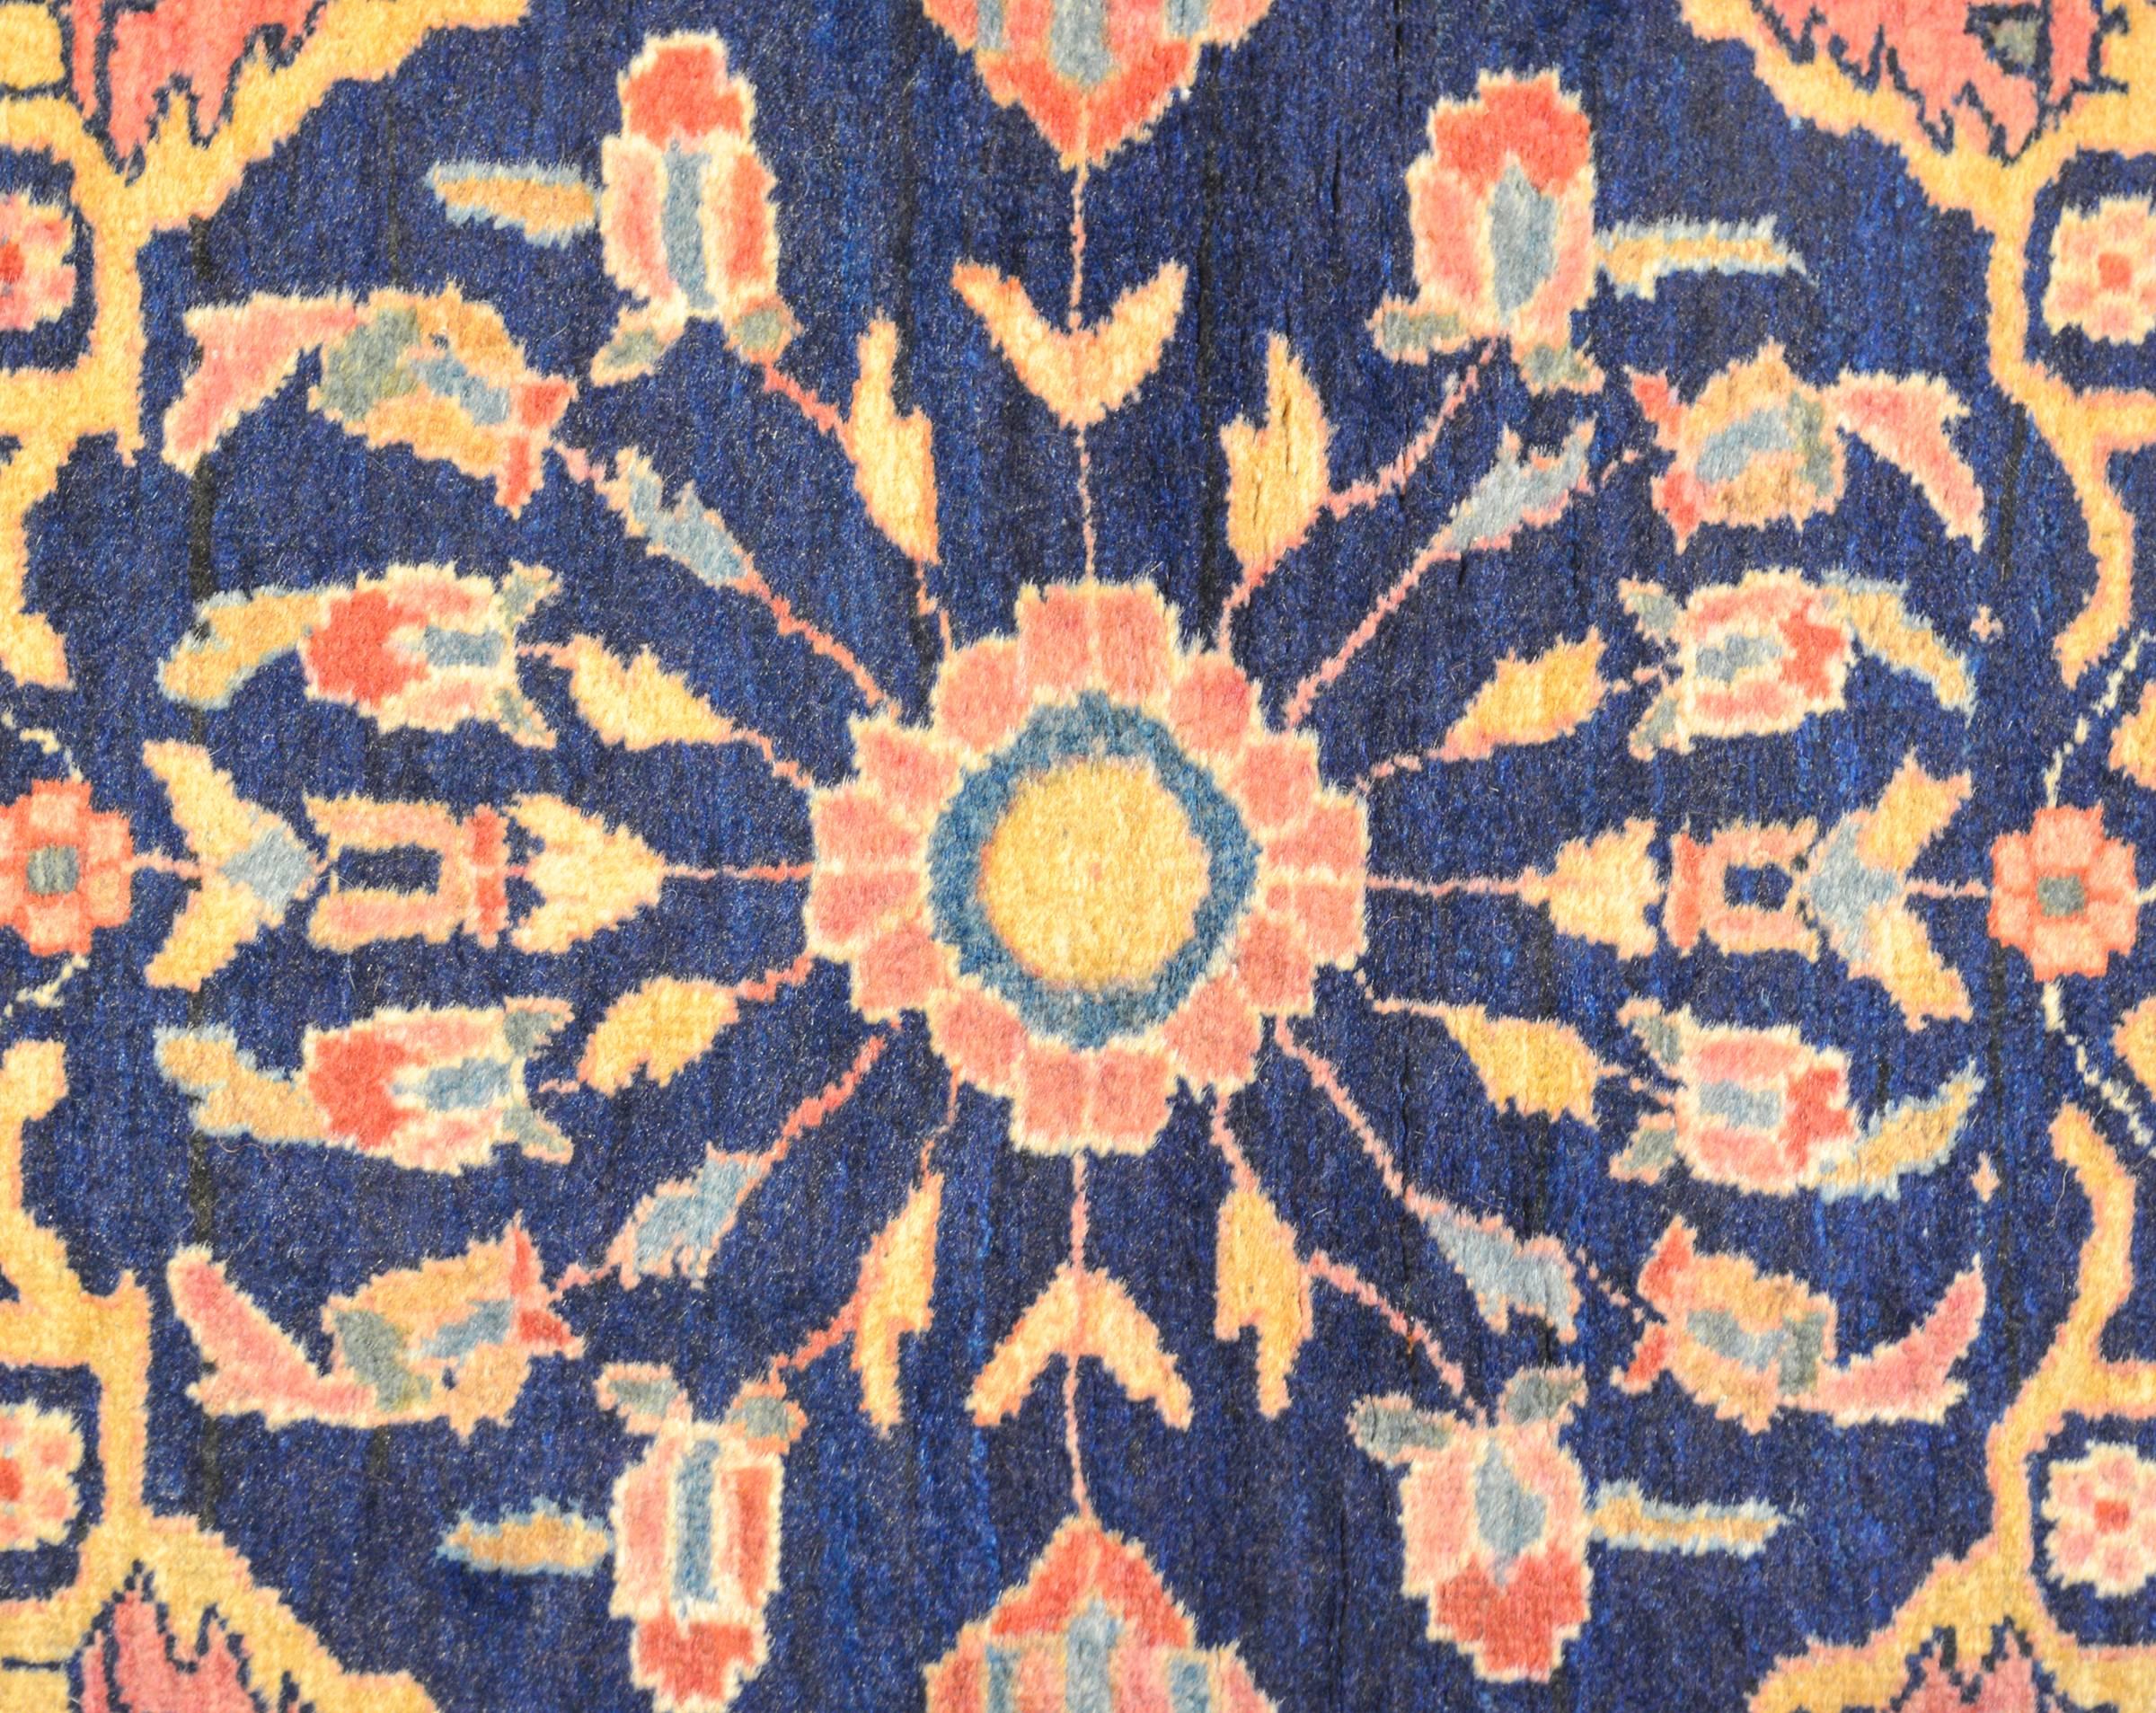 An incredible late 19th century Persian Maharajan rug with a beautifully and skillfully rendered large-scale floral medallion on a indigo background living amidst a salmon field of scrolling vines and flowers. The border is sweet with a large-scale